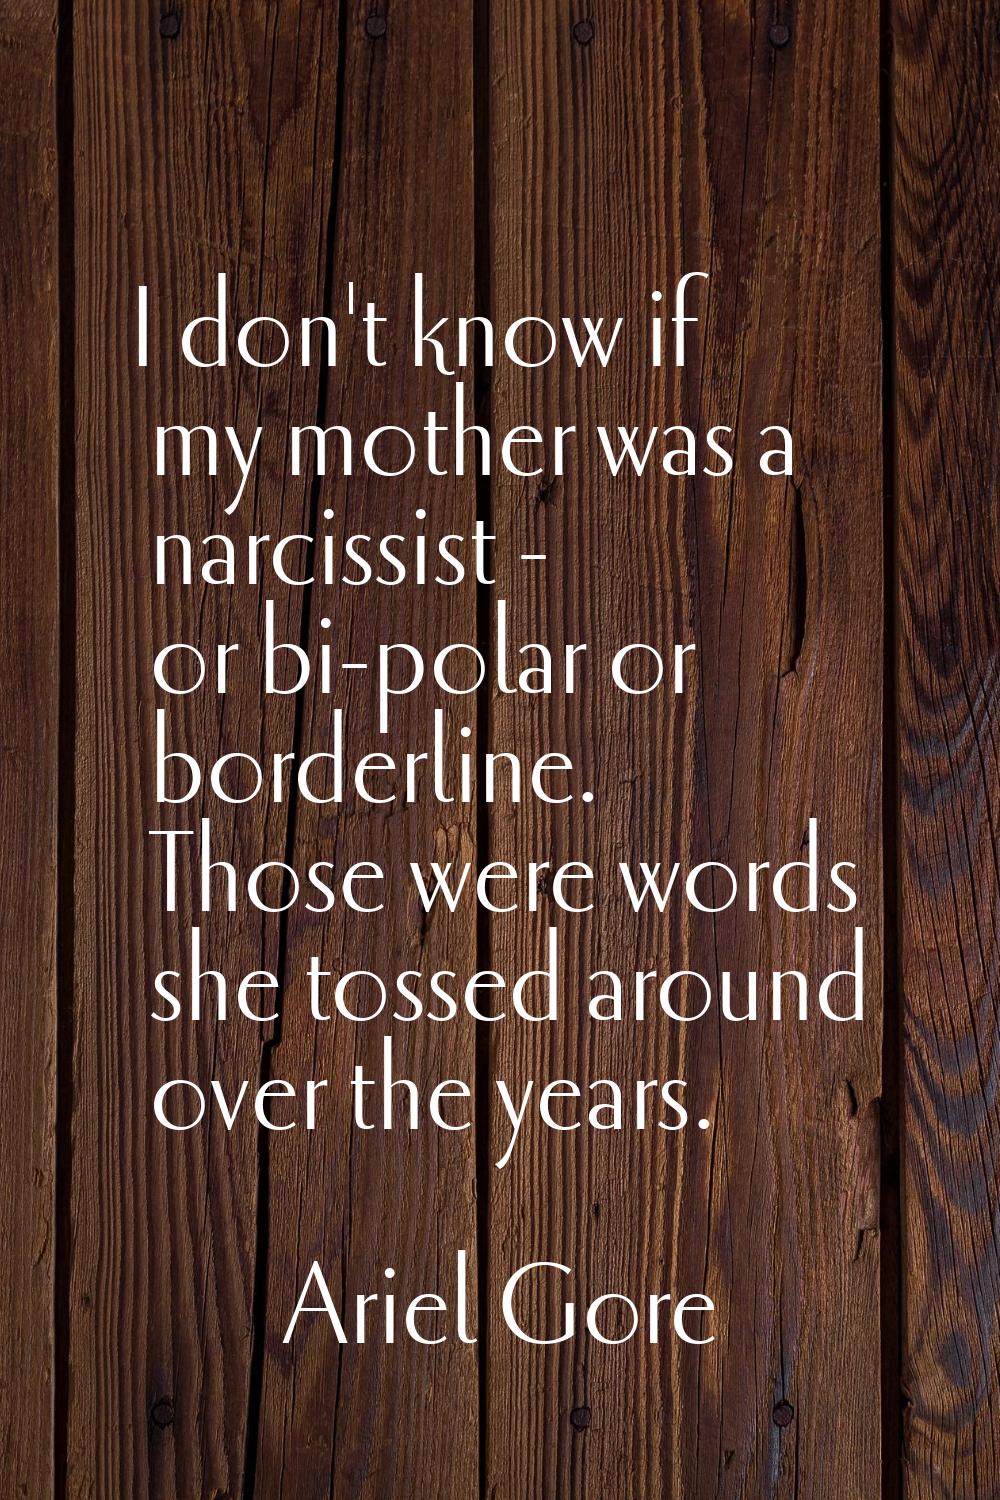 I don't know if my mother was a narcissist - or bi-polar or borderline. Those were words she tossed